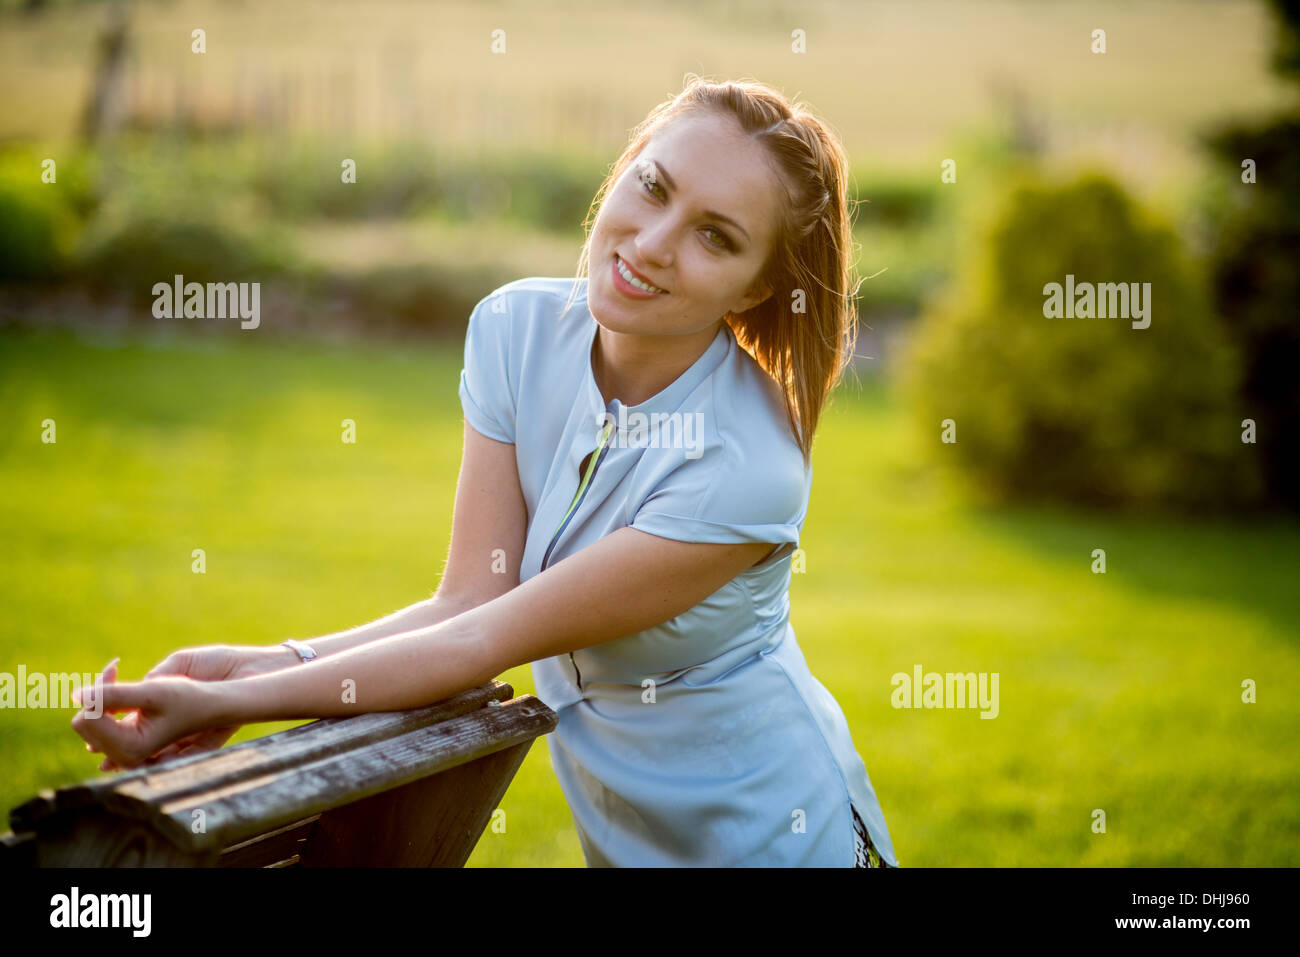 Pretty woman outdoors in springtime Stock Photo